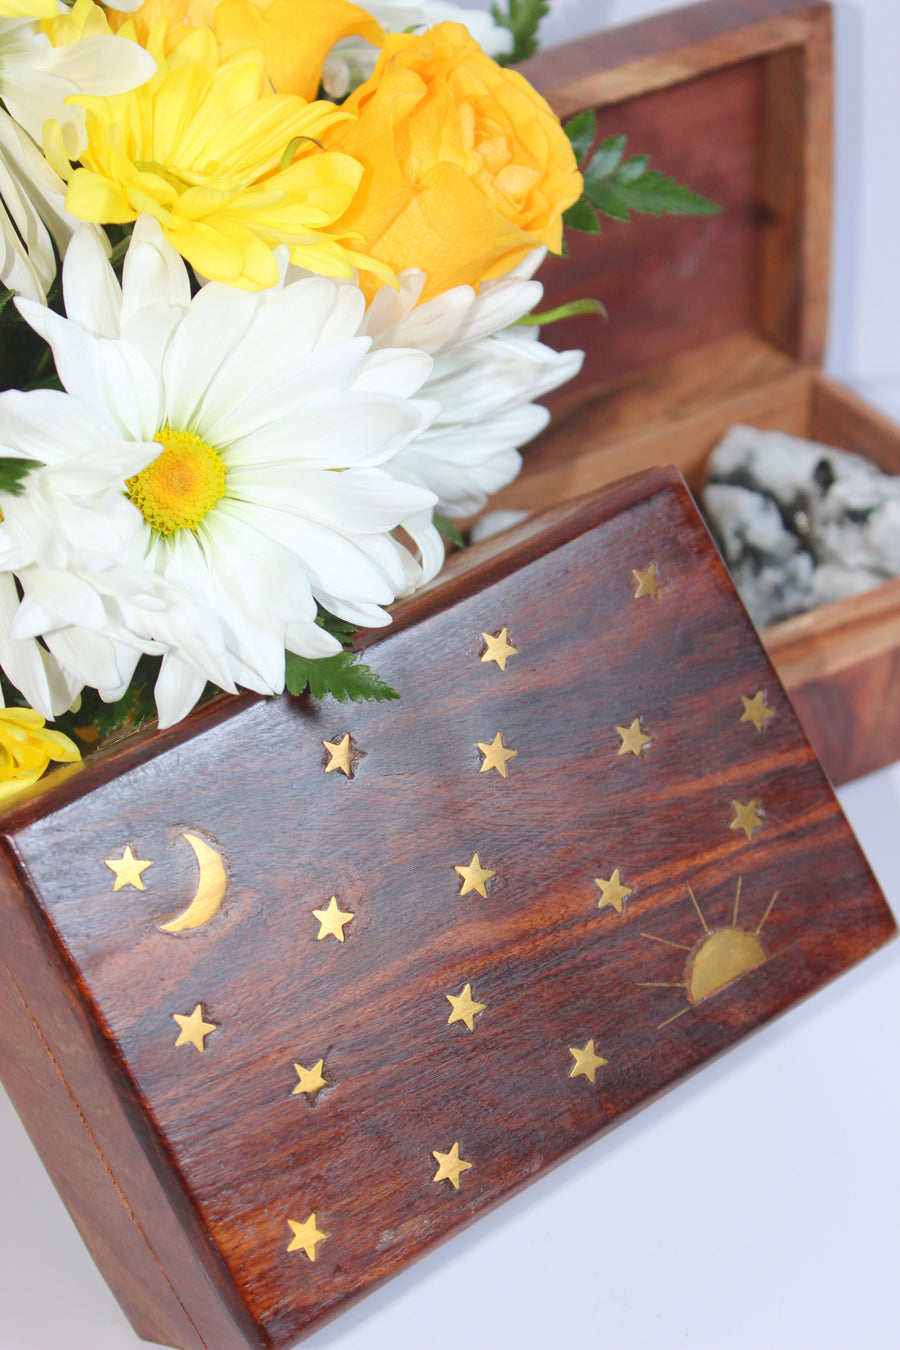 Wooden Celestial Themed Box for Crystal Magic + Storage